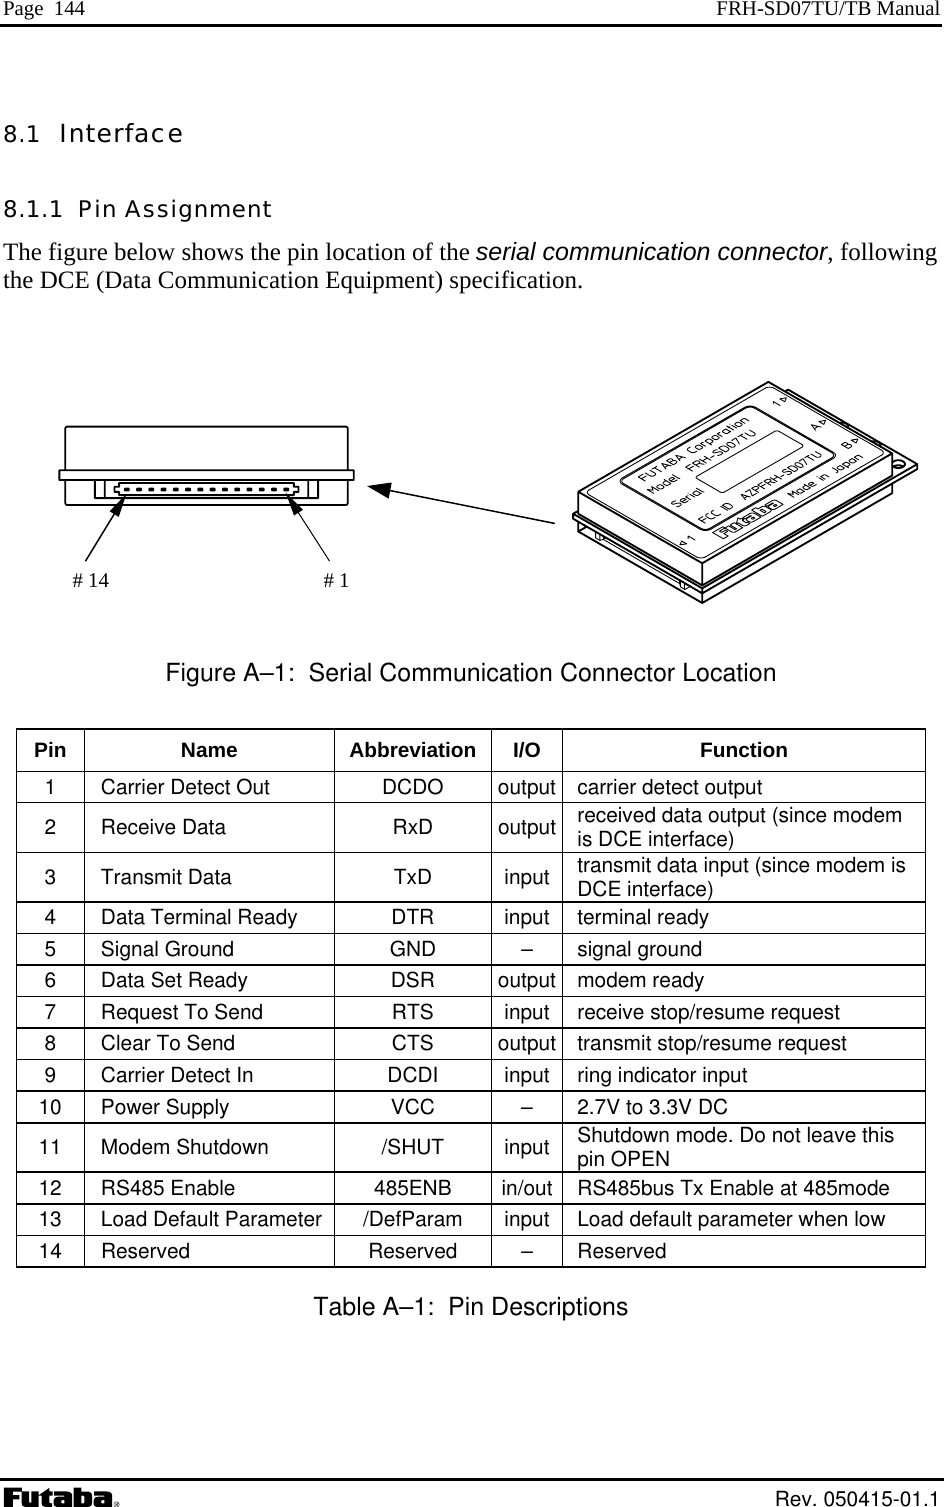 Page  144  FRH-SD07TU/TB Manual 8.1  Interface 8.1.1  The fig tthe DCE (Data Communication EquipmPin Assignment ure below shows the pin loca ion of the serial communication connector, following ent) specification.                                 tor Location Pin # 1 # 14  Figure A–1:  Serial Communication ConnecName Abbreviation I/O  Function 1    Carrier Detect Out  DCDO  output carrier detect output 2  Receive Data  RxD  output received data output (since modemis DCE interface)   3  Transmit Data  TxD  input transmit data input (since modem is DCE interface) 4    Data Terminal Ready  DTR  input terminal ready 5    Signal Ground  GND  –  signal ground 6    Data Set Ready  DSR  output modem ready 7    Request To Send  RTS  input receive stop/resume request 8    Clear To Send  CTS  output transmit stop/resume request 9    Carrier Detect In  DCDI  input ring indicator input 10    Power Supply  VCC  –  2.7V to 3.3V DC 11  Modem Shutdown  /SHUT  input Shutdown mode. Do not leave this pin OPEN 12  RS485 Enable  485ENB  in/out RS485bus Tx Enable at 485mode 13    Load Default Parameter  /DefParam  input Load default parameter when low 14  Reserved  Reserved  –  Reserved Table A–1:  Pin Descriptions   Rev. 050415-01.1 